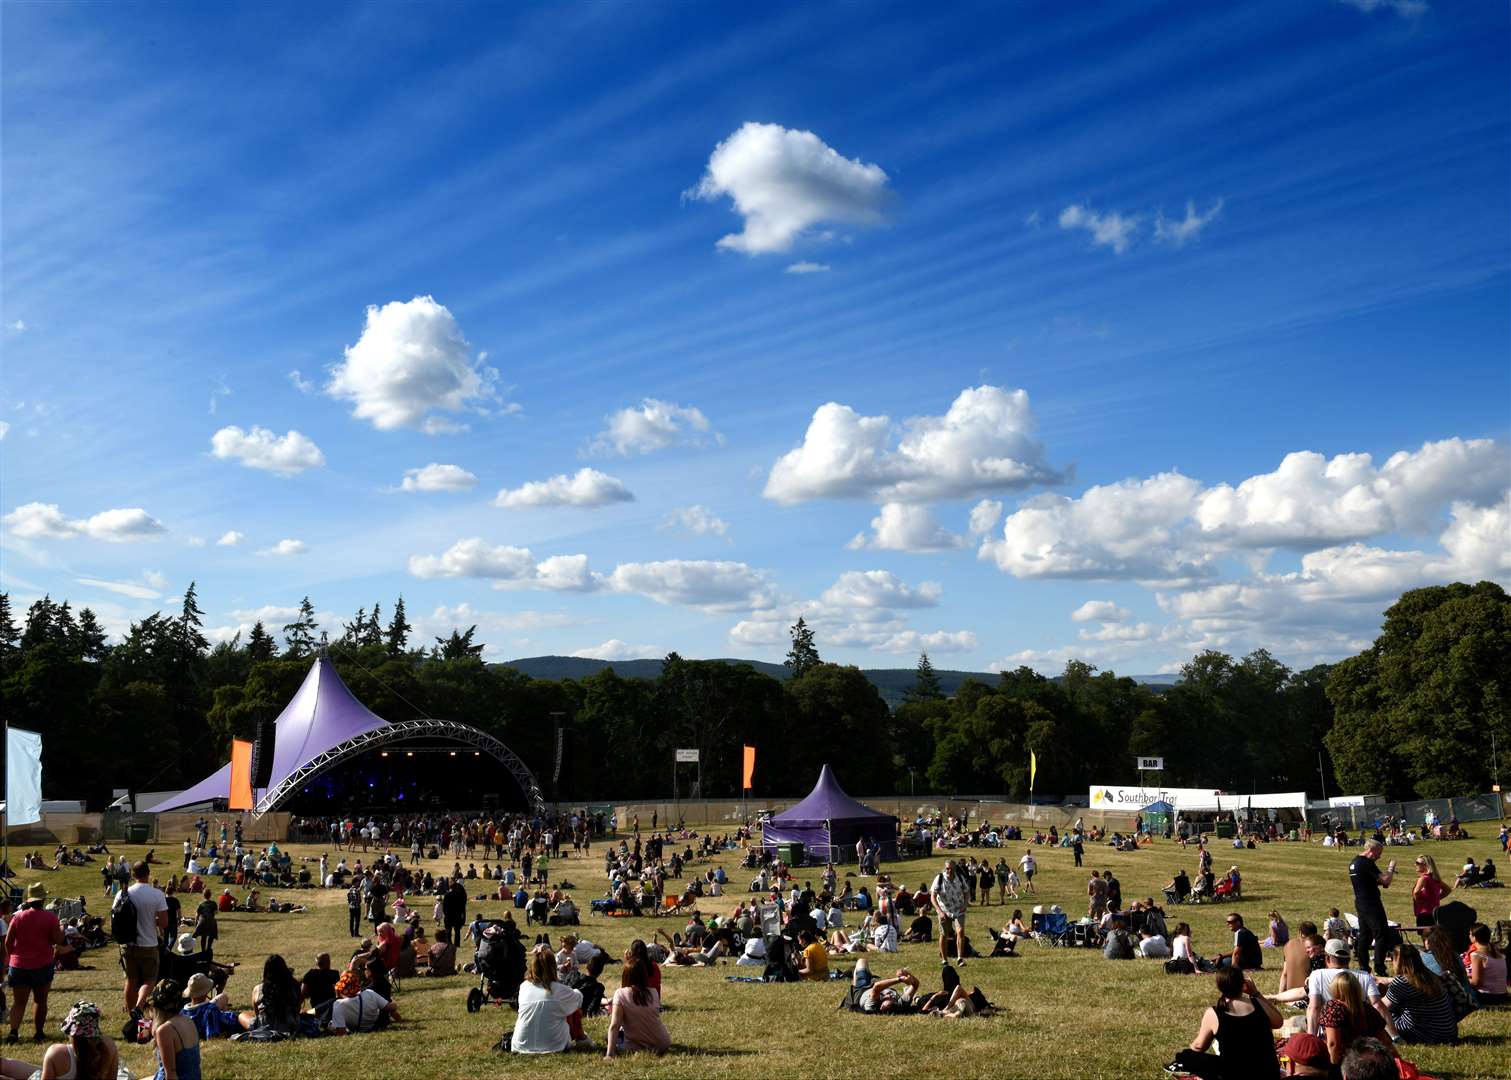 The Hot House stage in 2022, becoming the main arena stage this year in the sun. Picture: James Mackenzie